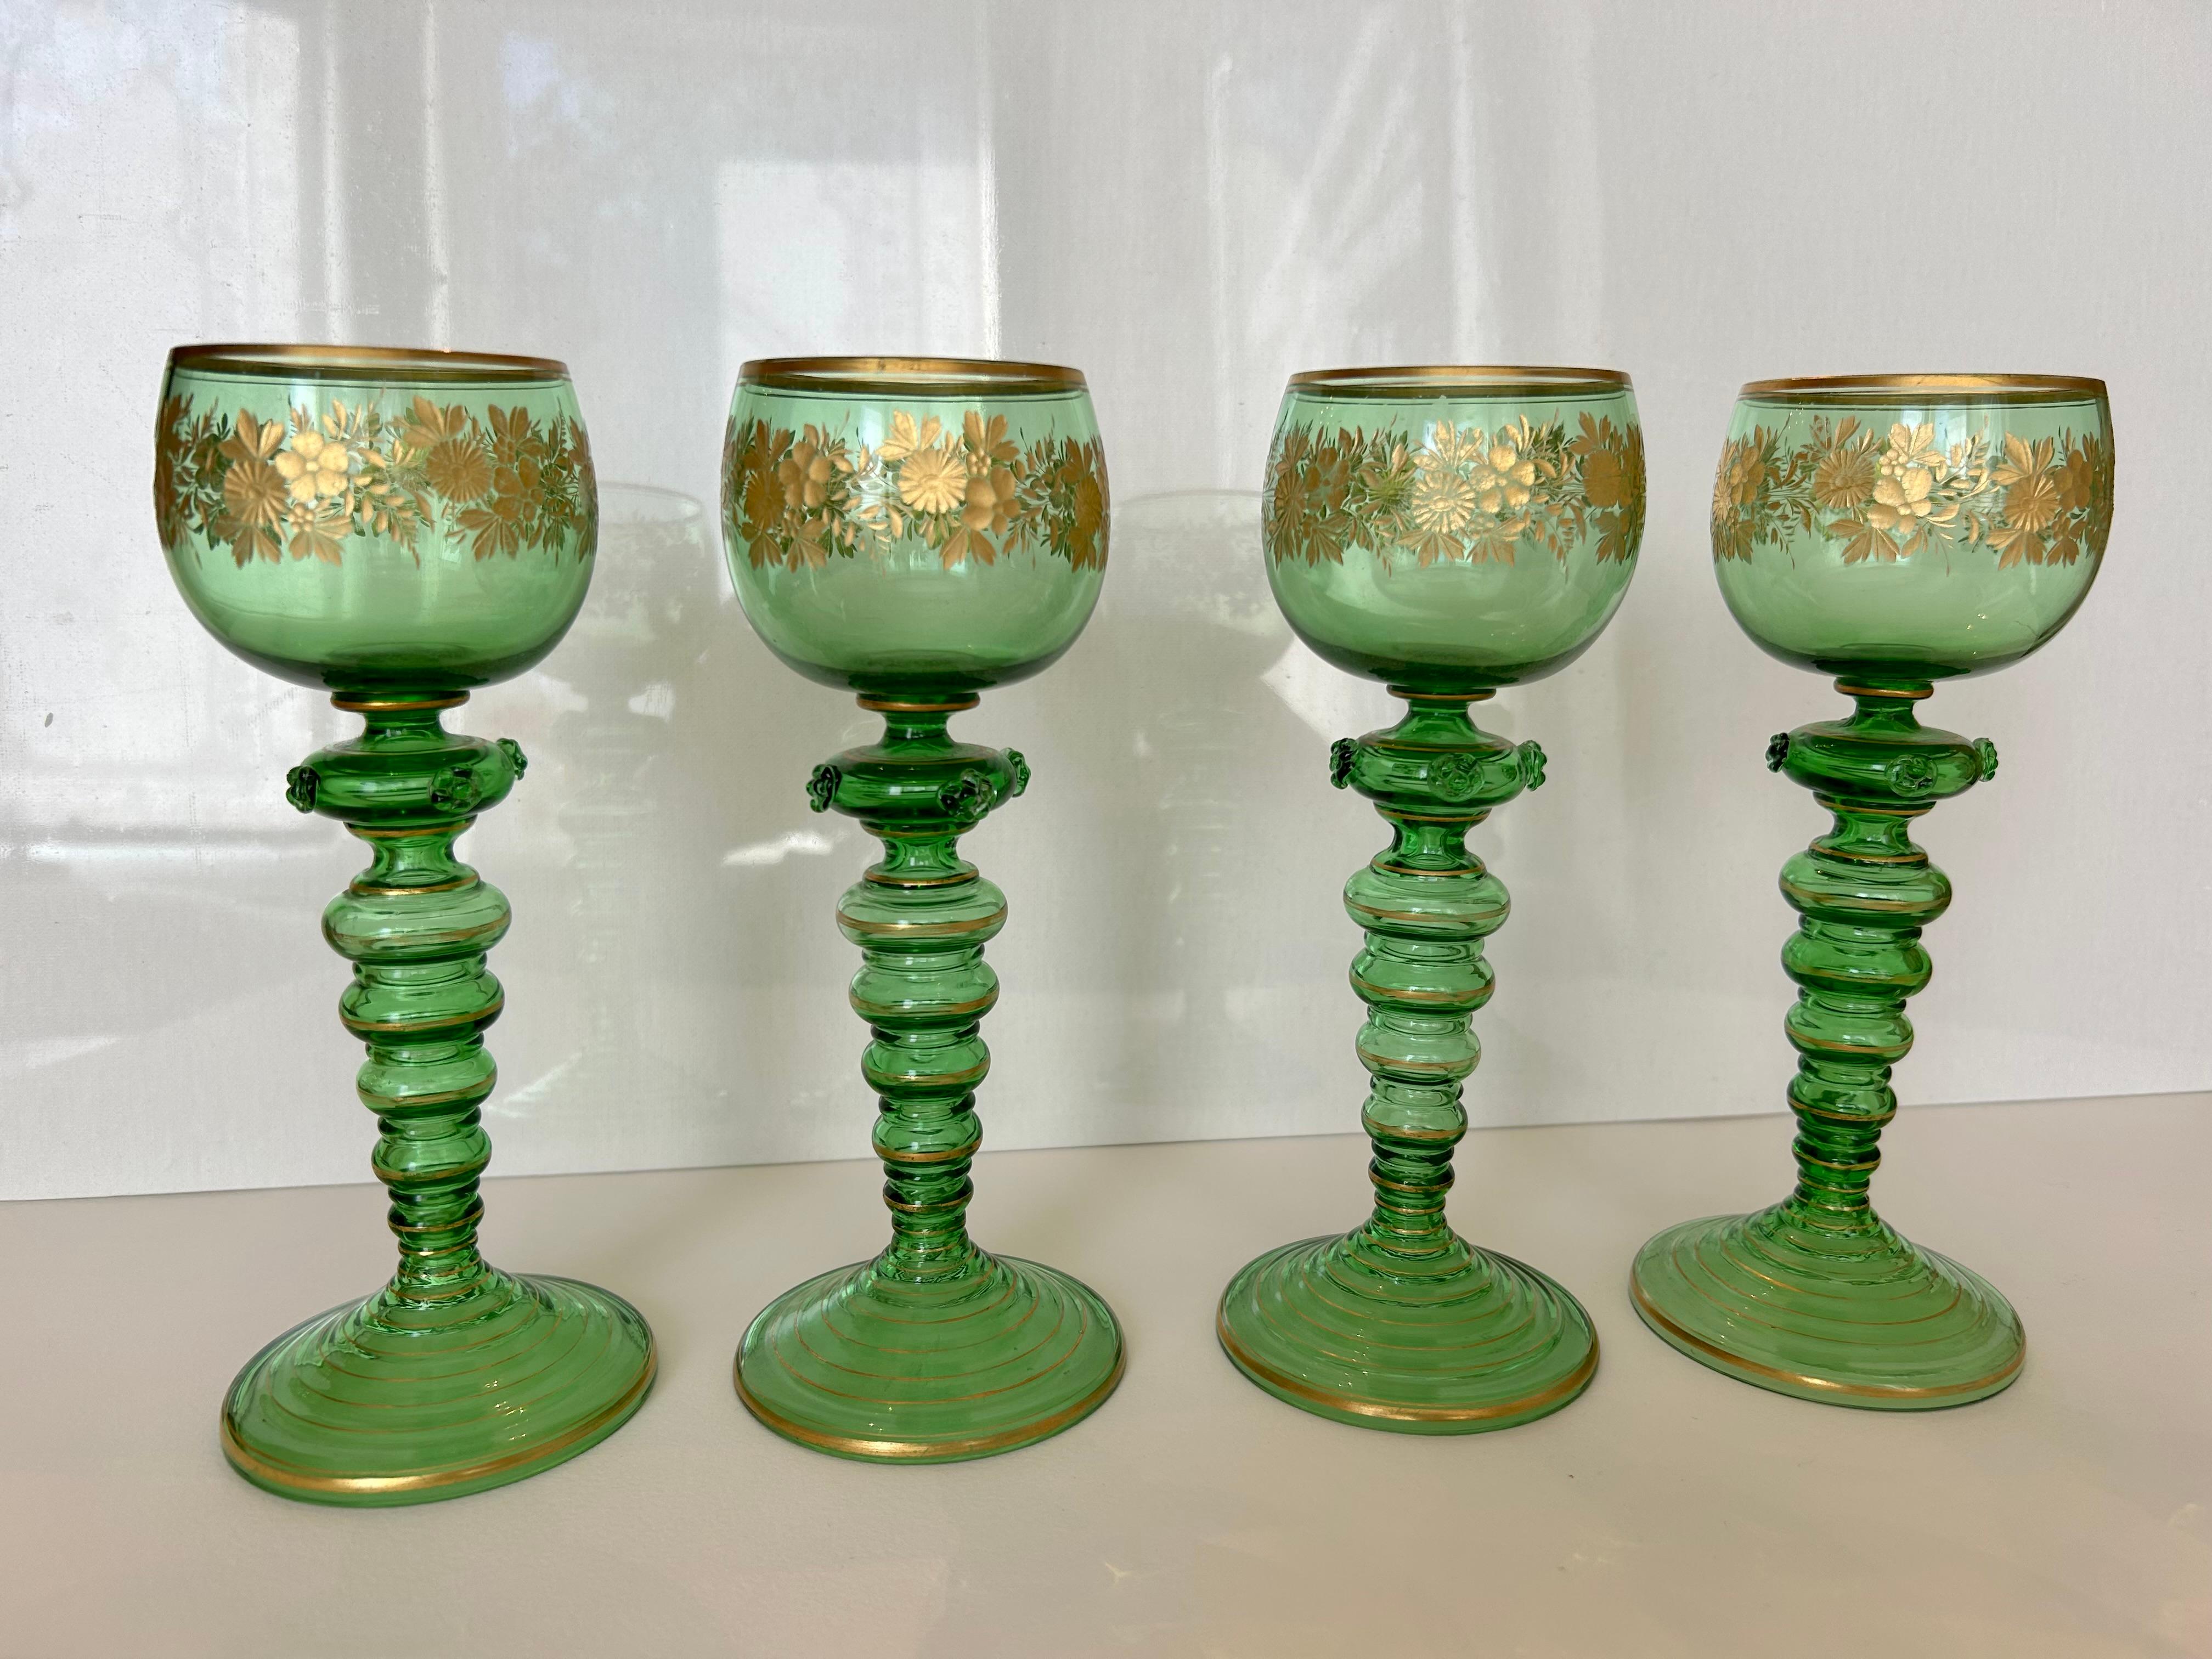 An exquisite set of four Roemer glasses, circa 1900. Each in bright green glass engraved and gilded with scrolling flowers and graduated gold rims. All four in mint condition.
These glasses are probably from the Netherlands, but may also be German